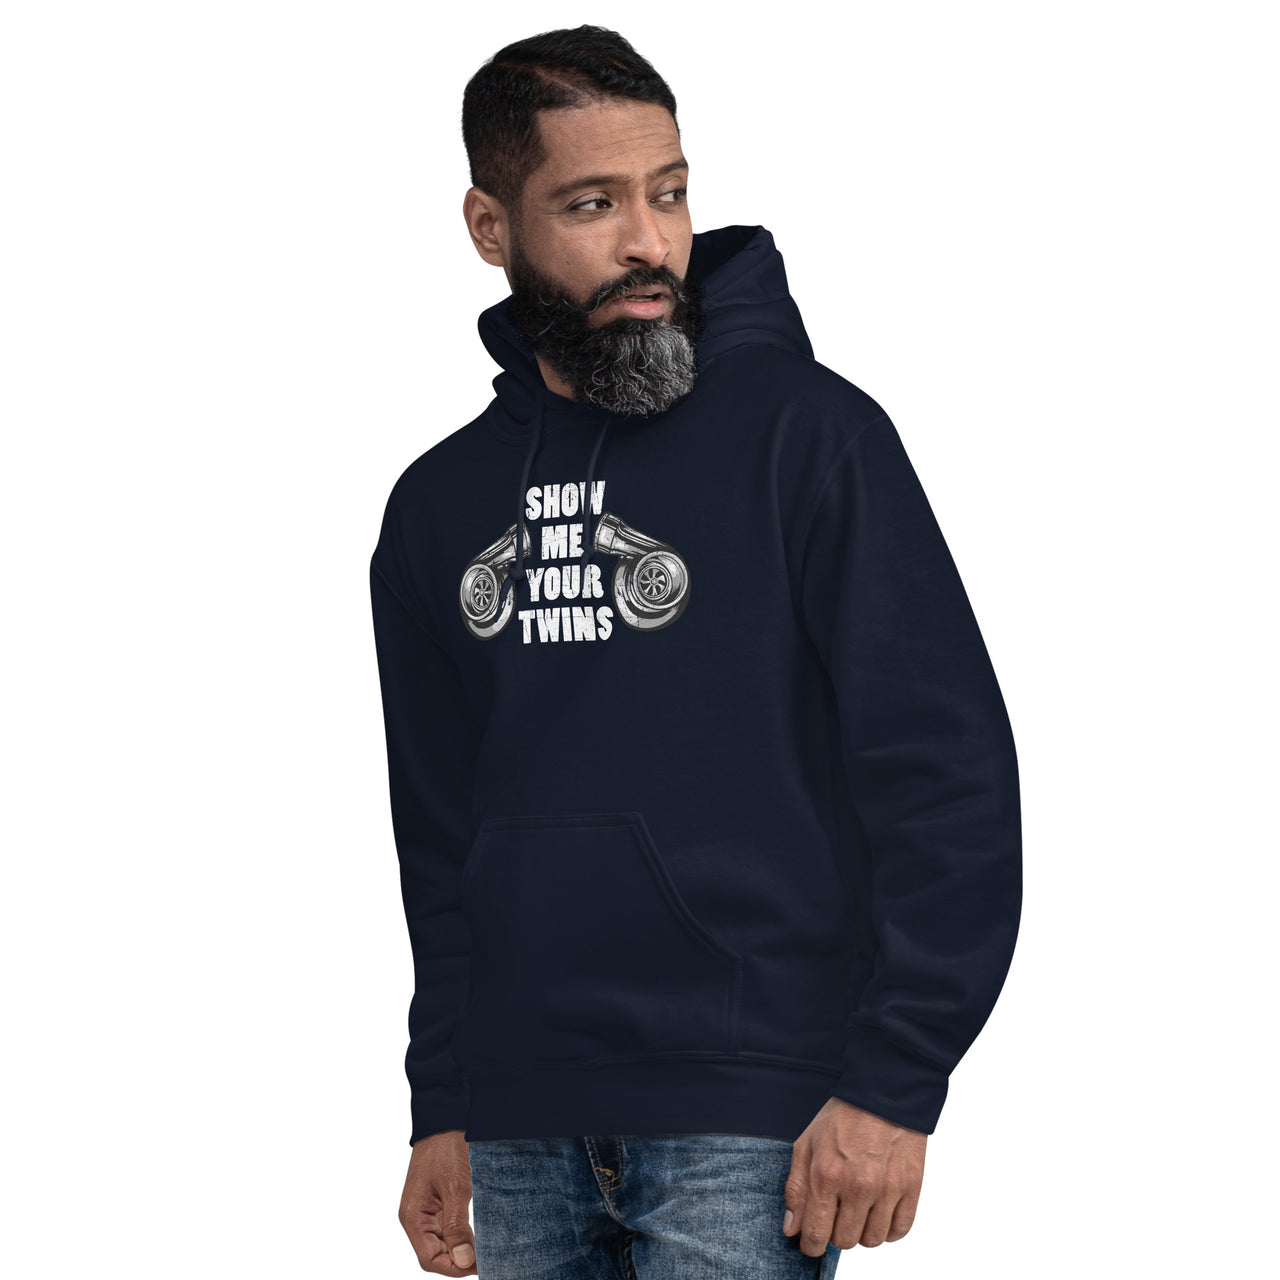 Show Me Your Twins Turbo Hoodie modeled in navy